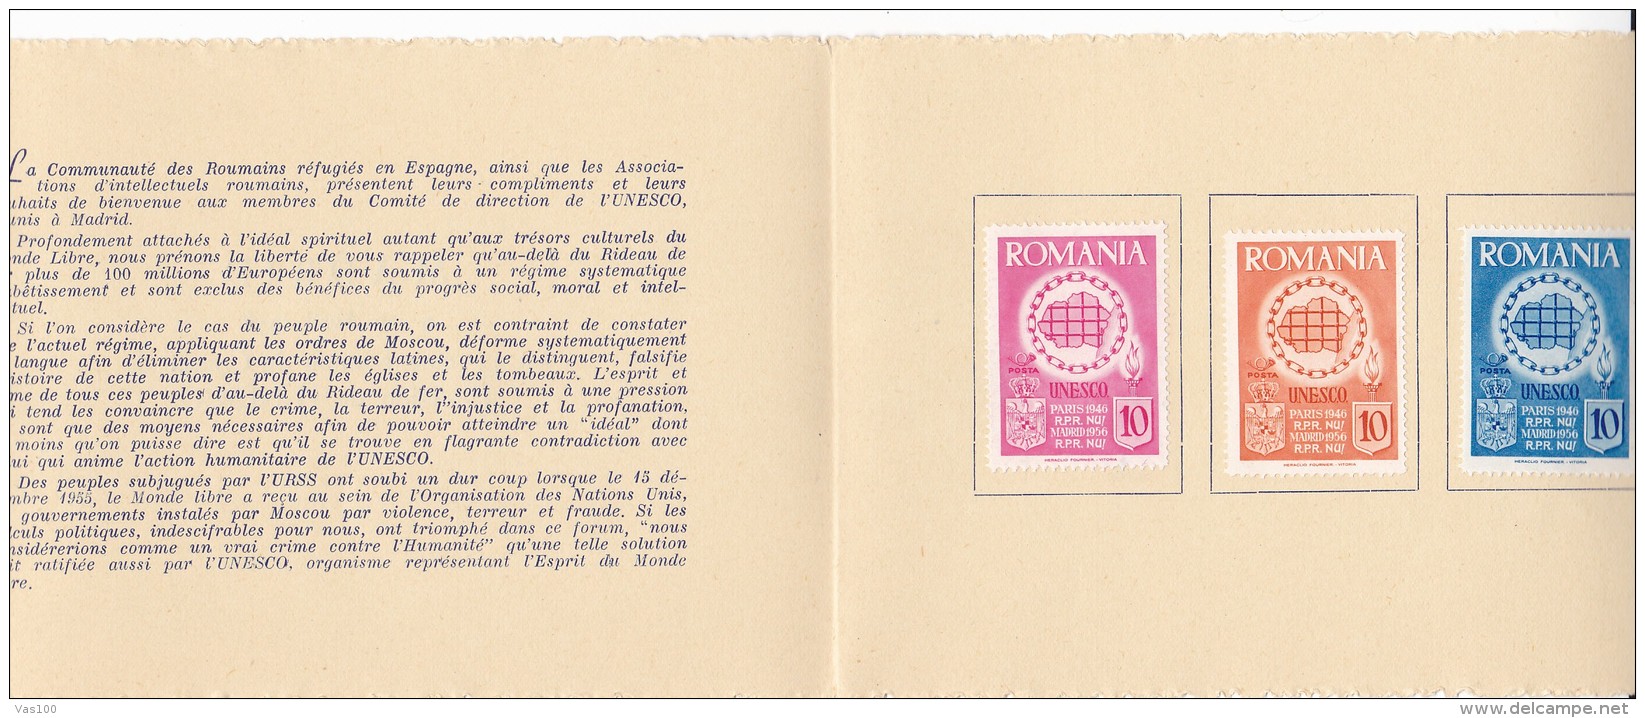 #T100    REUNION OF UNESCO COUNCIL, MADRID,    BOOKLETS,   1956   , SPAIN EXIL, ROMANIA. - Cuadernillos